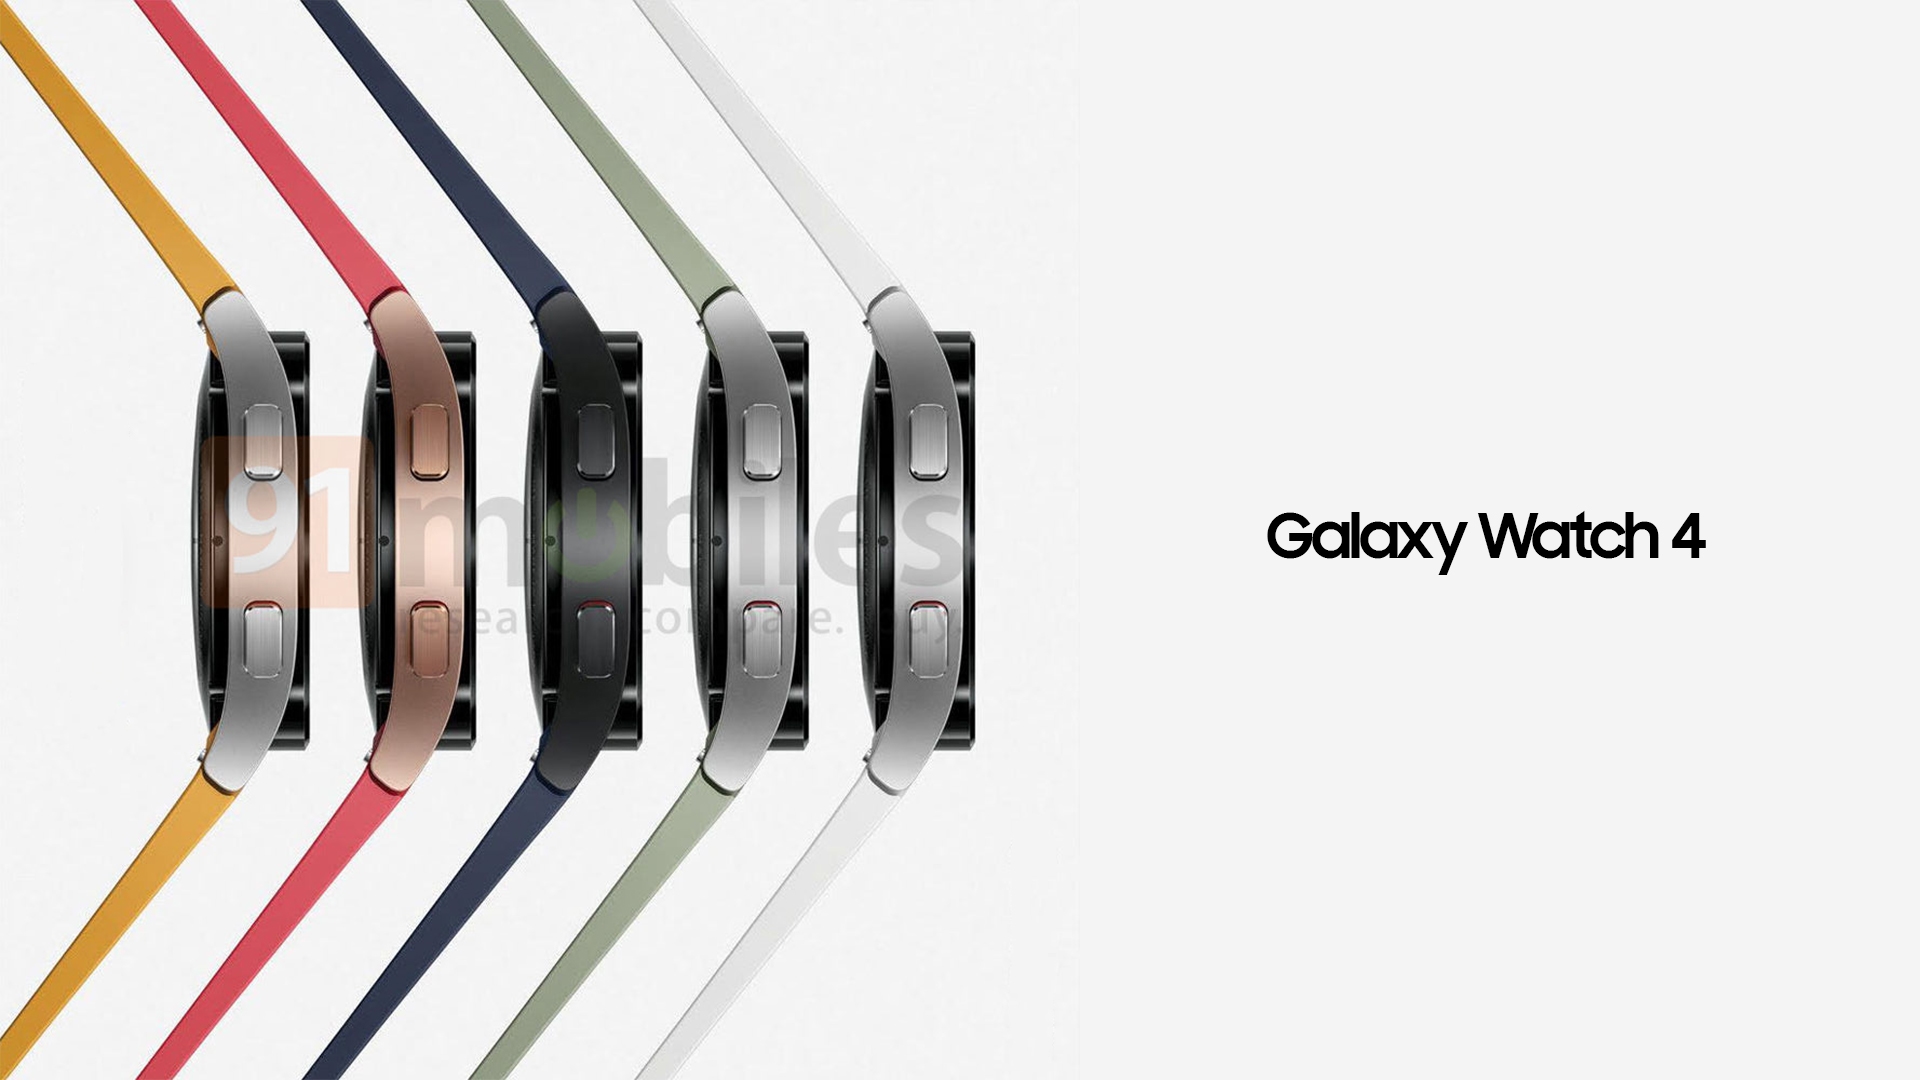 Samsung Galaxy Watch 4 appeared on official renders: new colors, flat display and no bezel